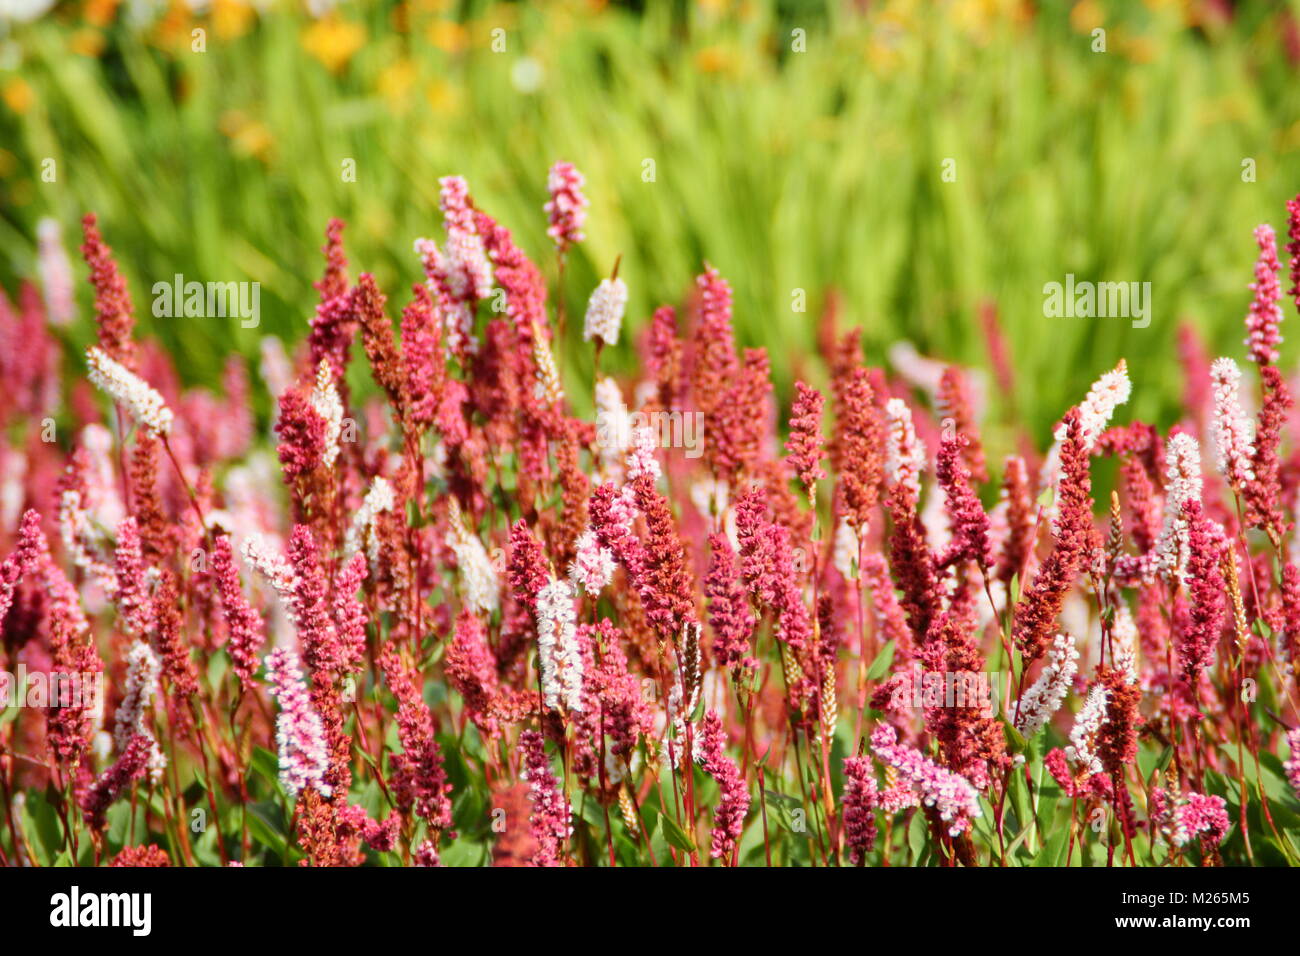 Persicaria affinis 'Darjeeling Red', a colourful ground cover perennial, in an English garden border in late summer (August), UK. AGM Stock Photo